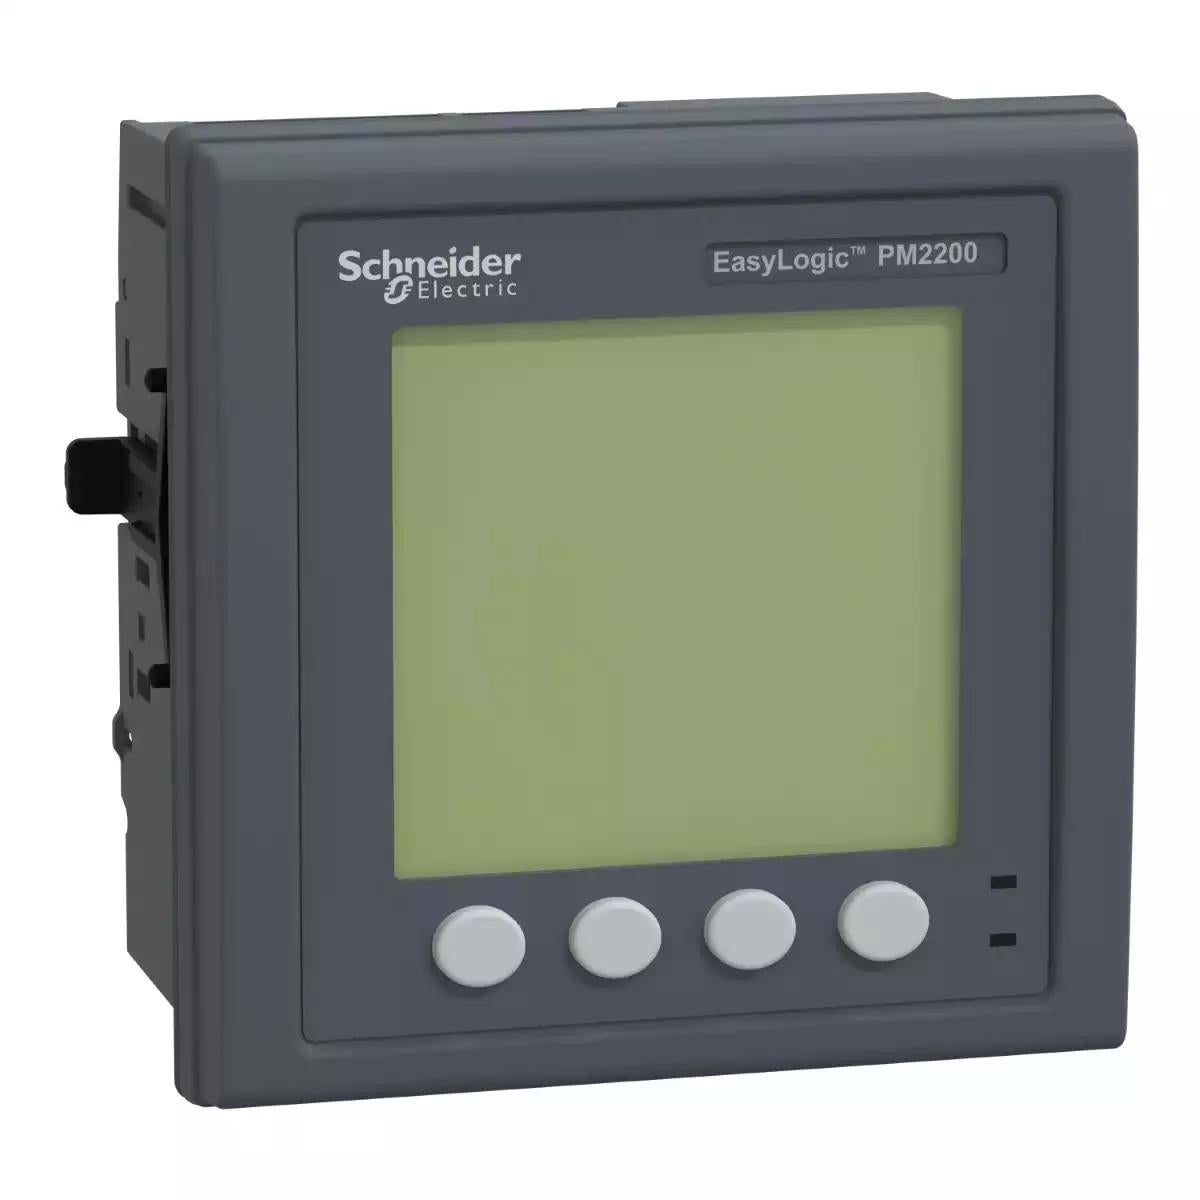 Schneider Electric EasyLogic PM2230 - Power & Energy meter - up to 31stH - LCD - RS485 - class 0.5S